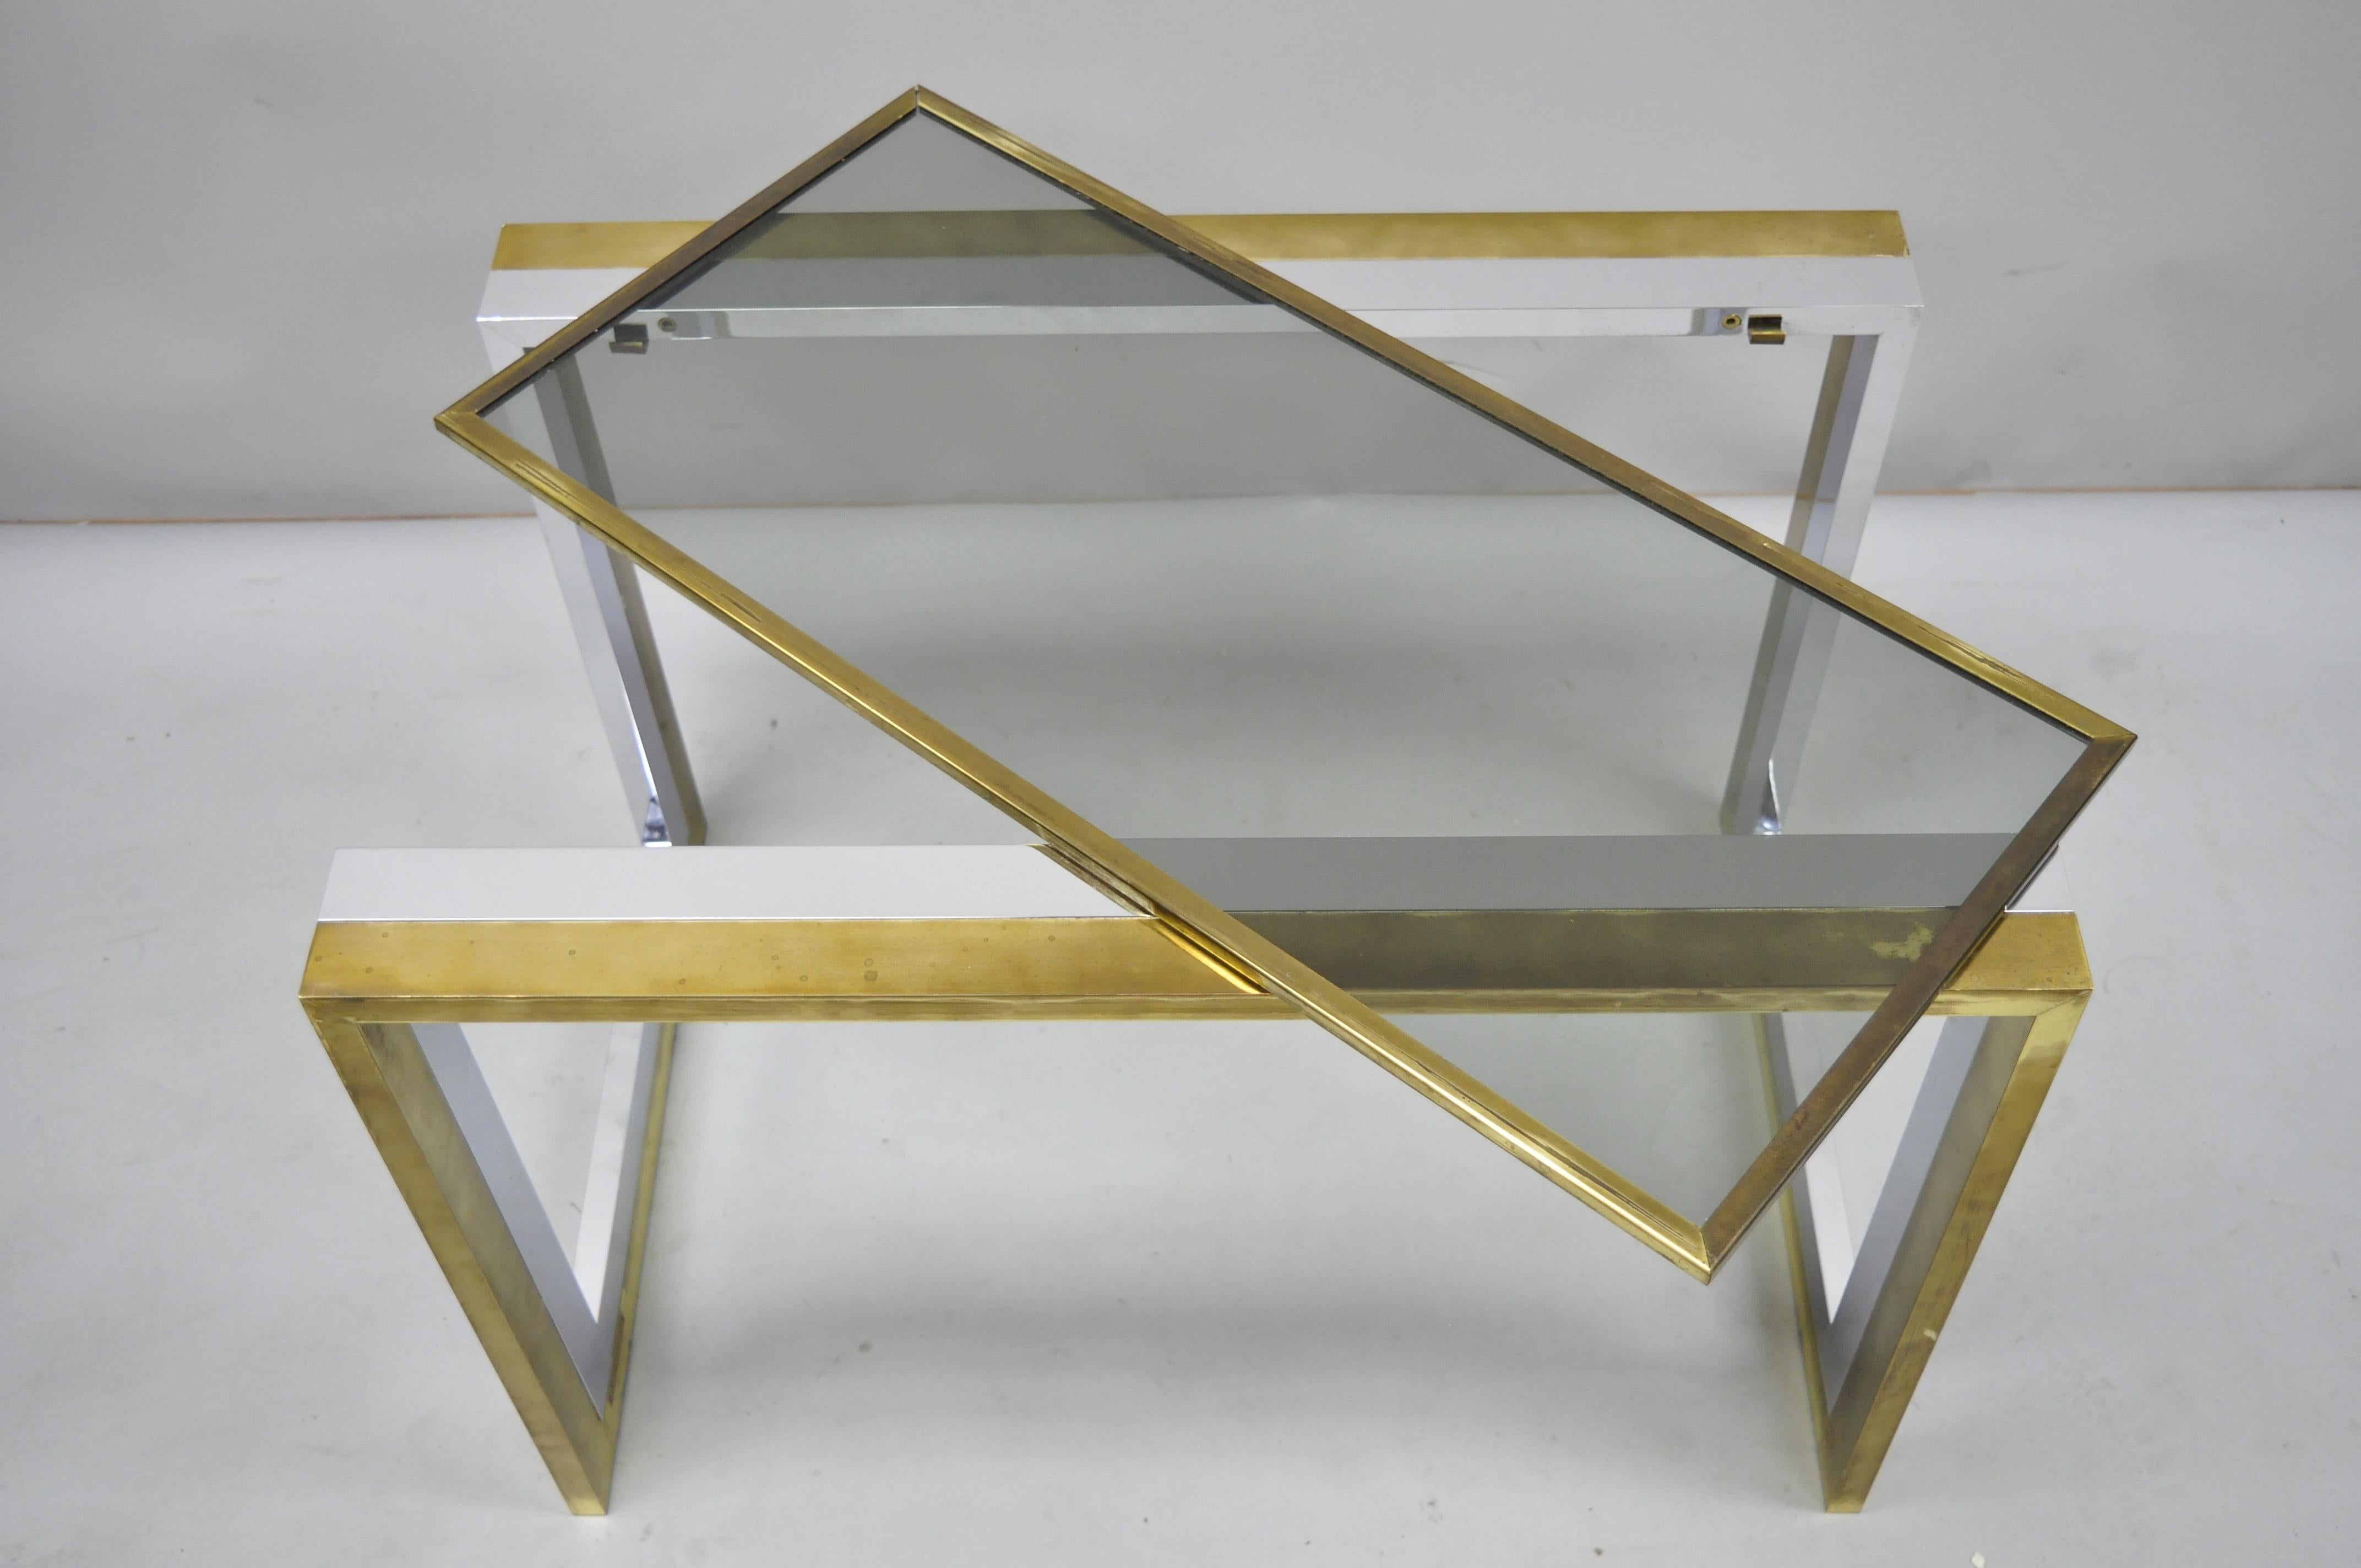 20th Century Mid-Century Modern Chrome Brass Glass Waterfall Side Table by Messin Finland For Sale